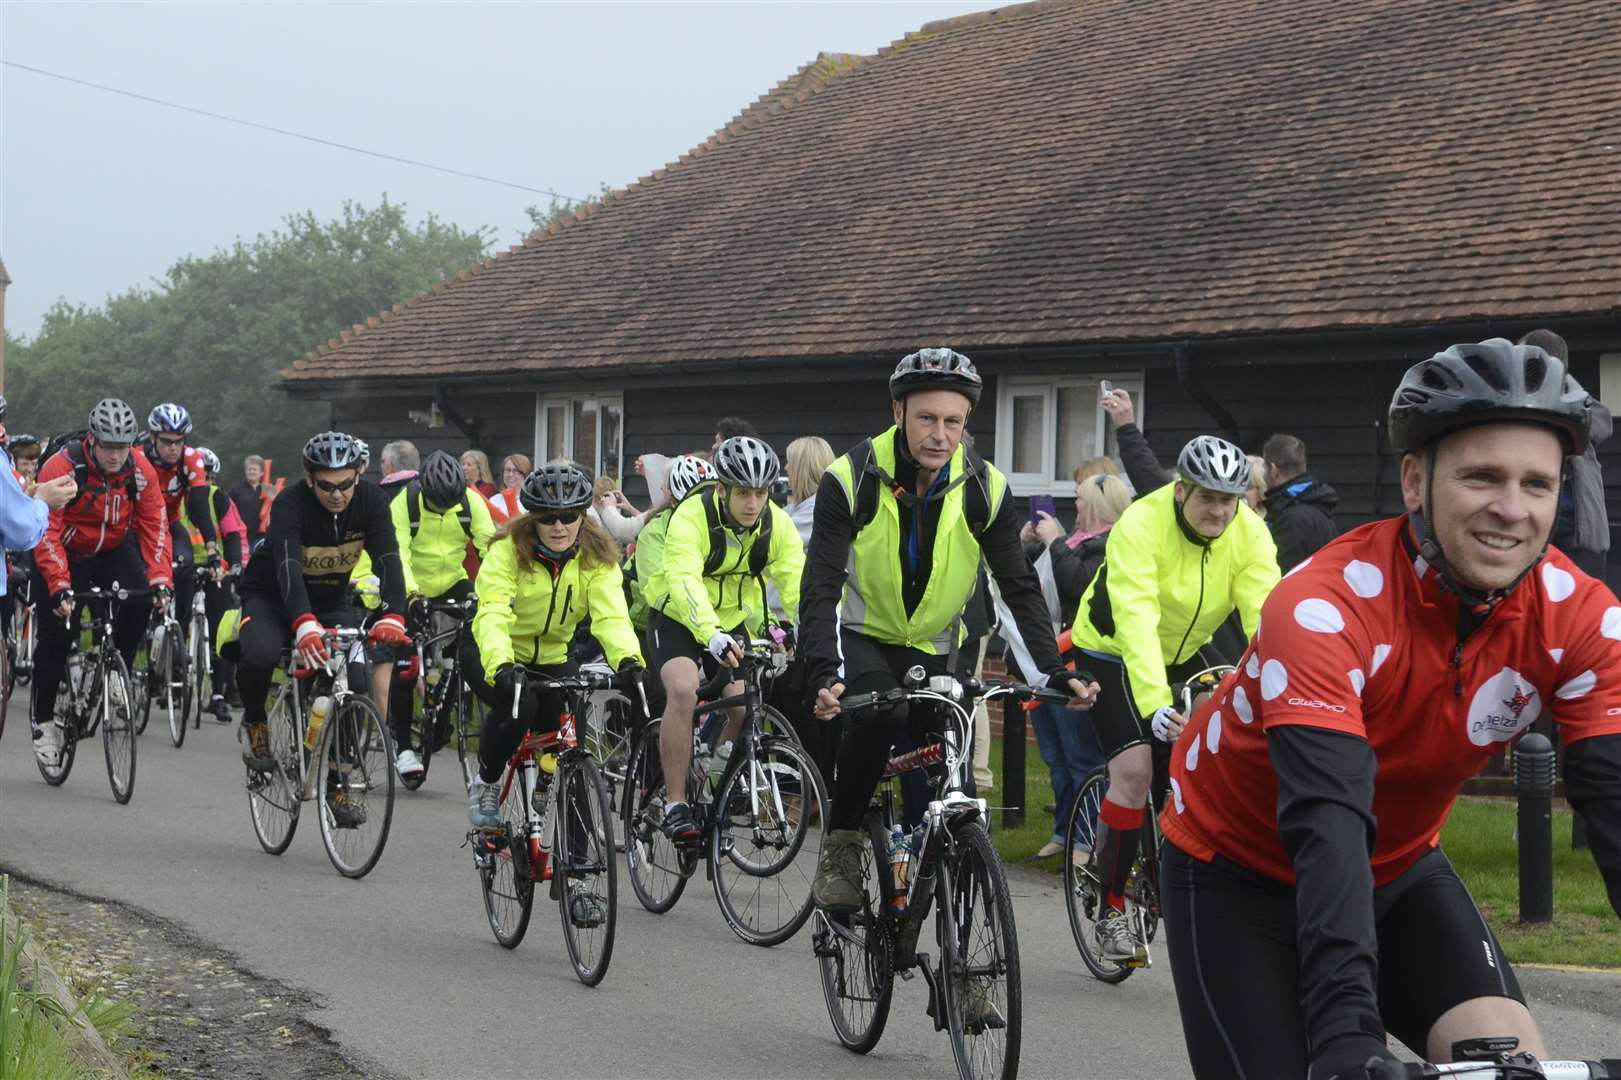 It's not the first time there's been a bike ride for the charity. Picture: Chris Davey